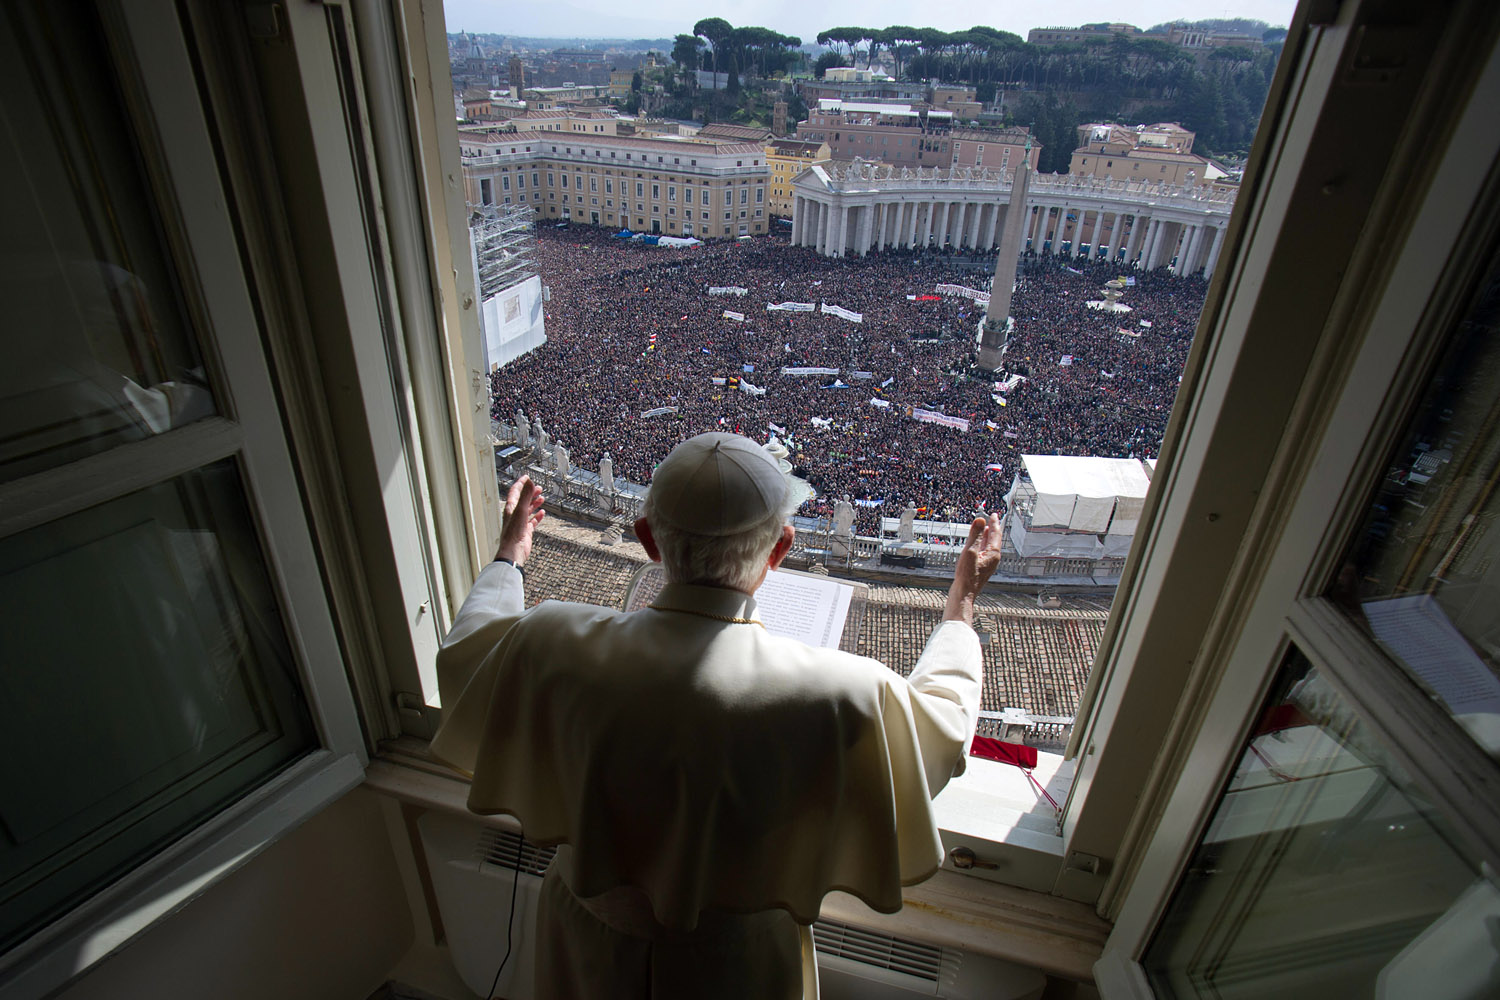 Feb. 24, 2013. Pope Benedict XVI's leads the Angelus prayer from the window of his apartments at the Vatican.